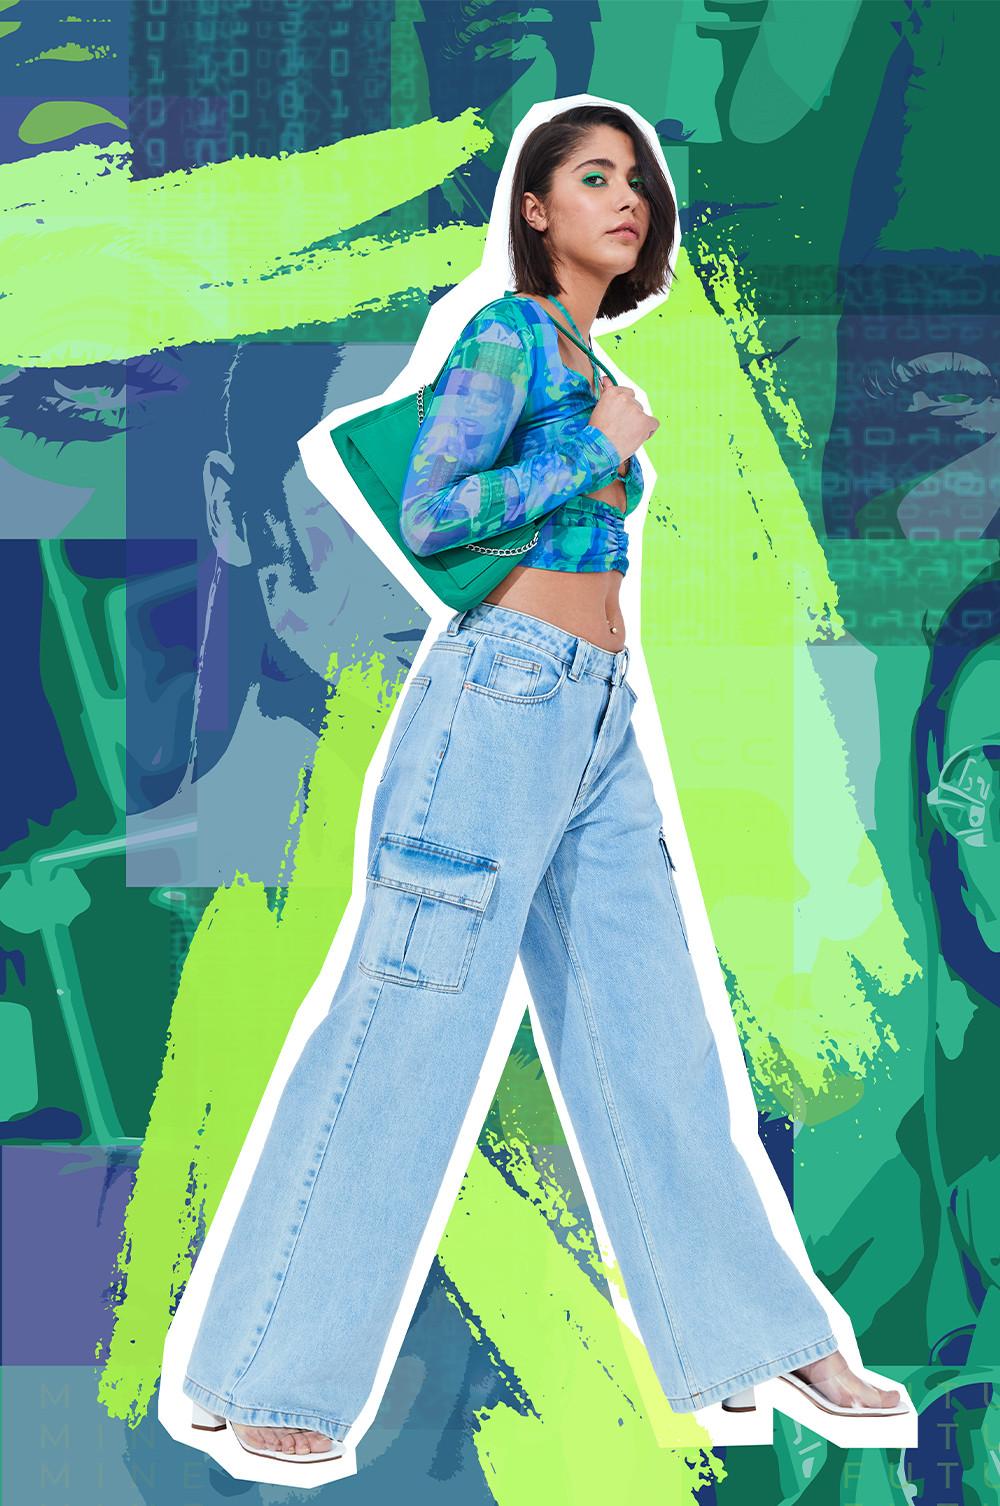 Model wears light blue denim cargo jeans, with cropped patterned top, and white heeled shoes